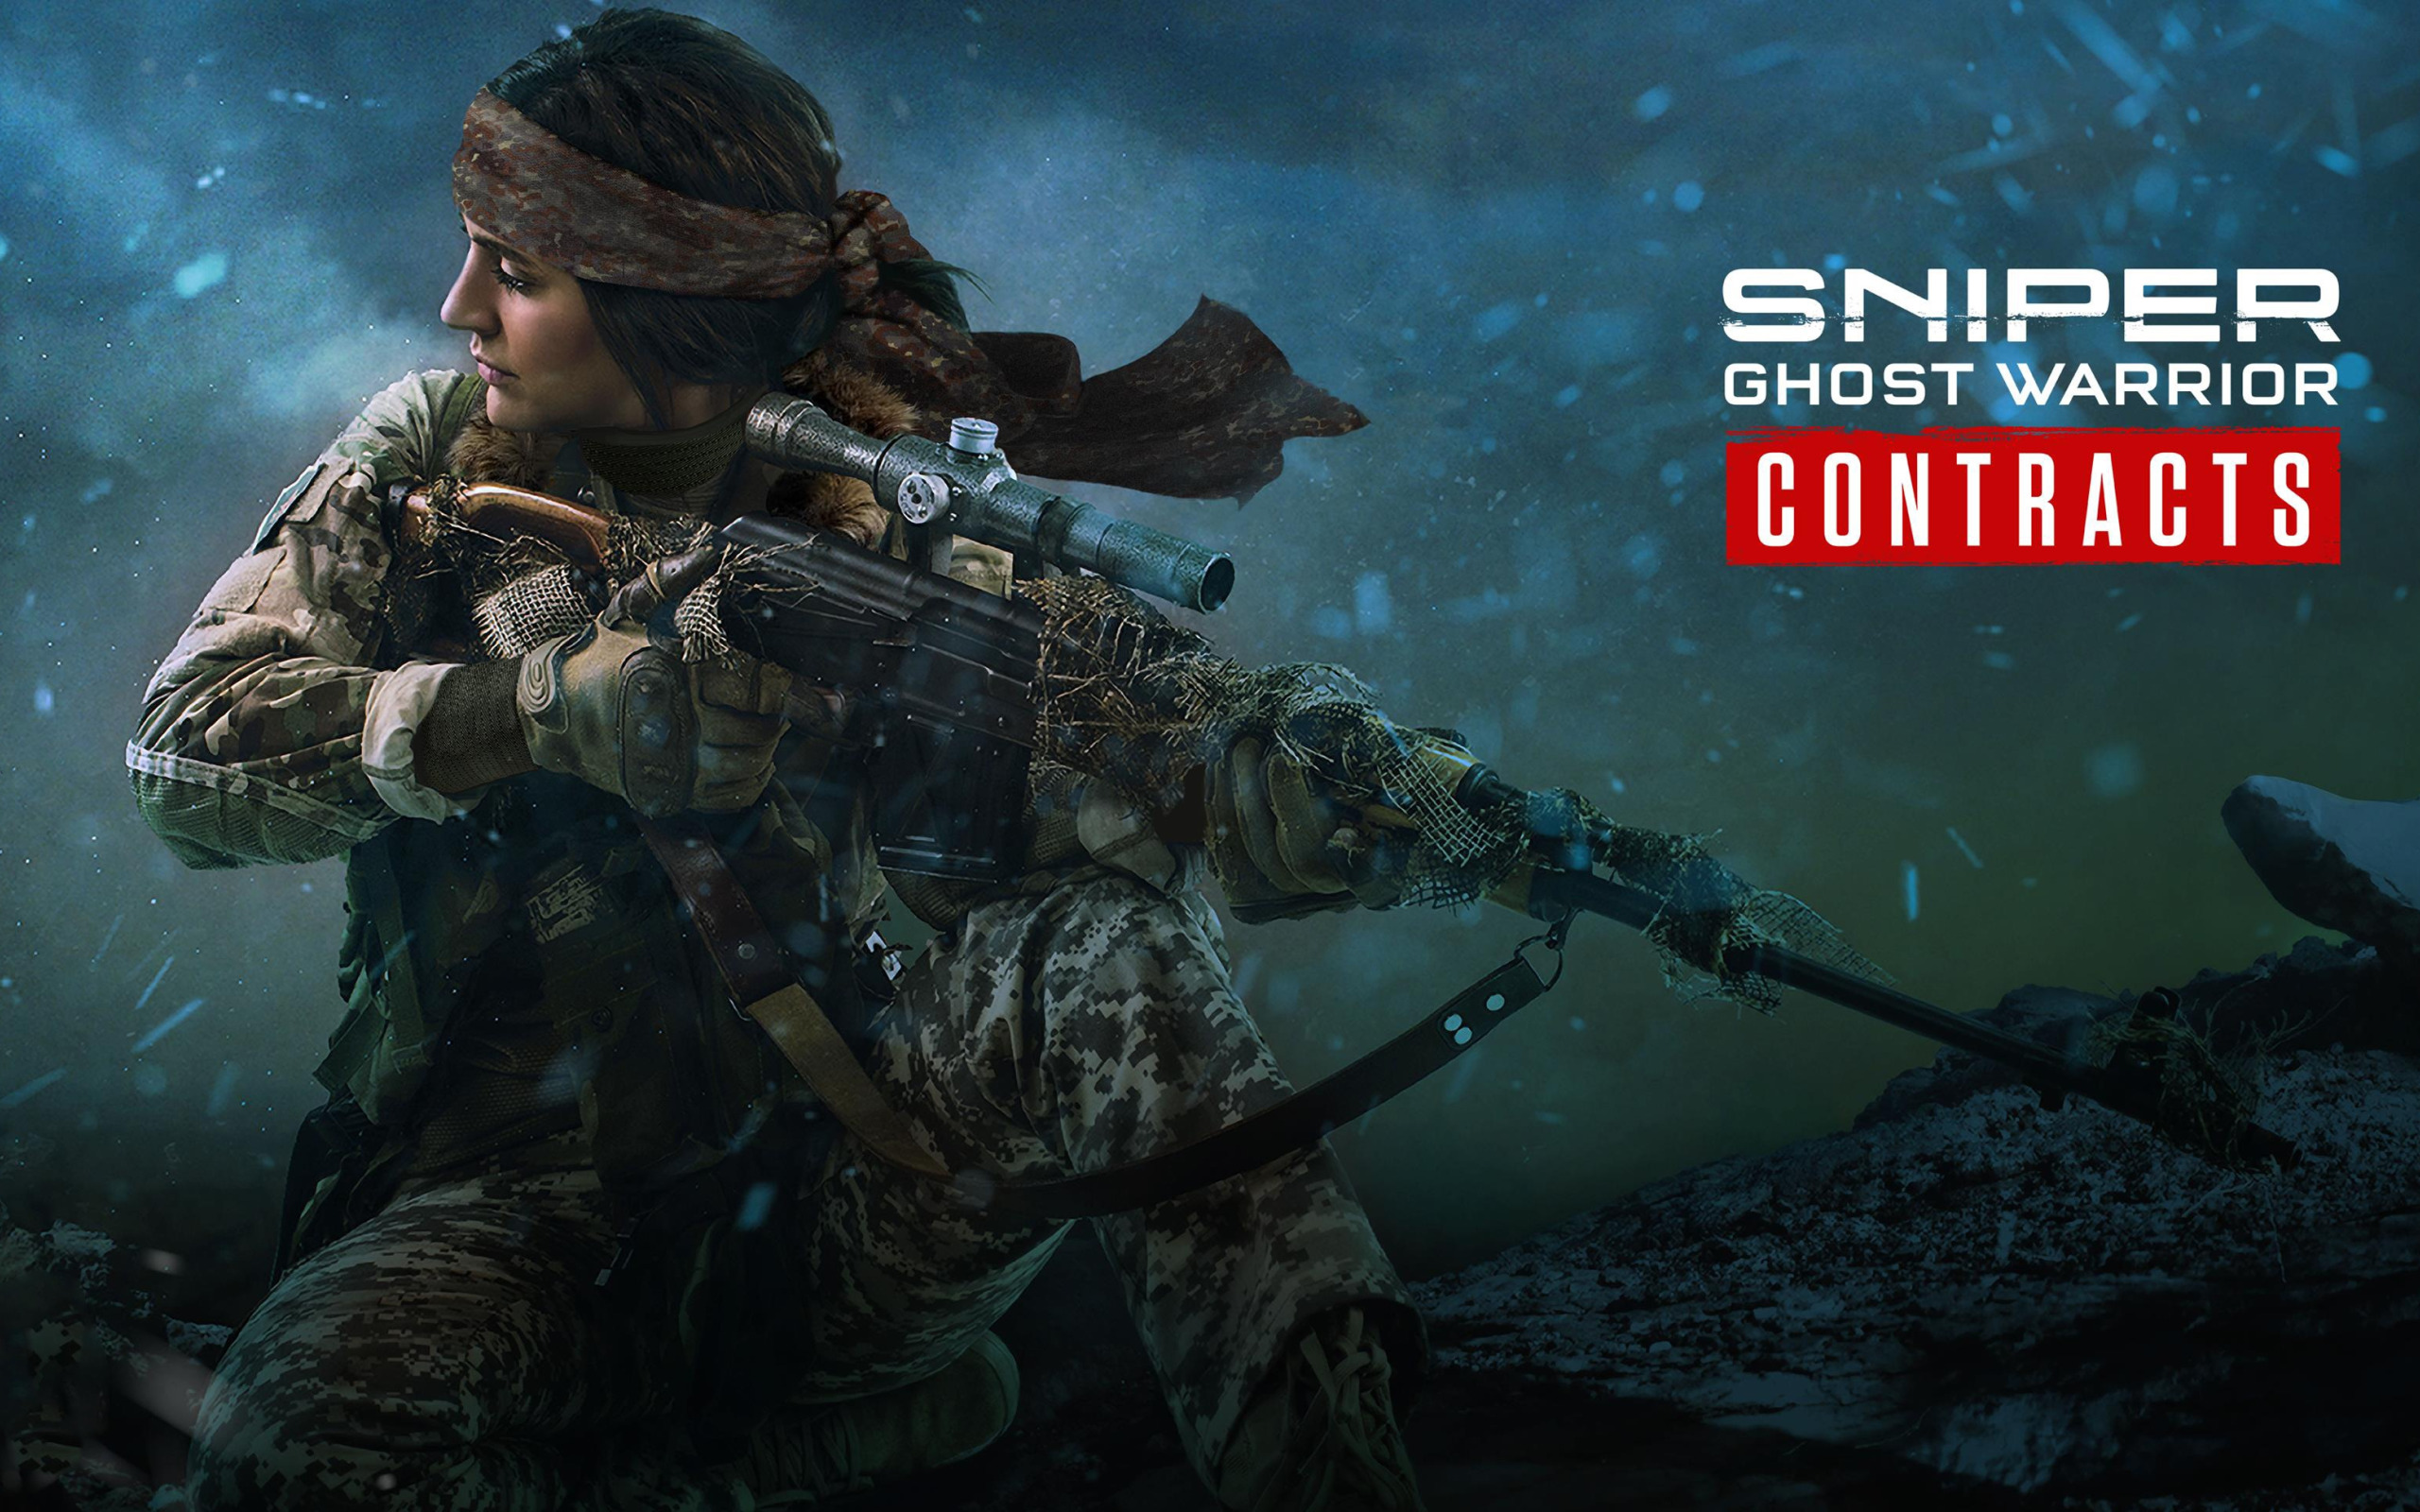 Sniper ghost warrior contracts. Sniper Ghost Warrior Contracts 2. Снайпер игра 2019. Снайпер воин призрак контракт 1. Снайпер воин призрак контракт.